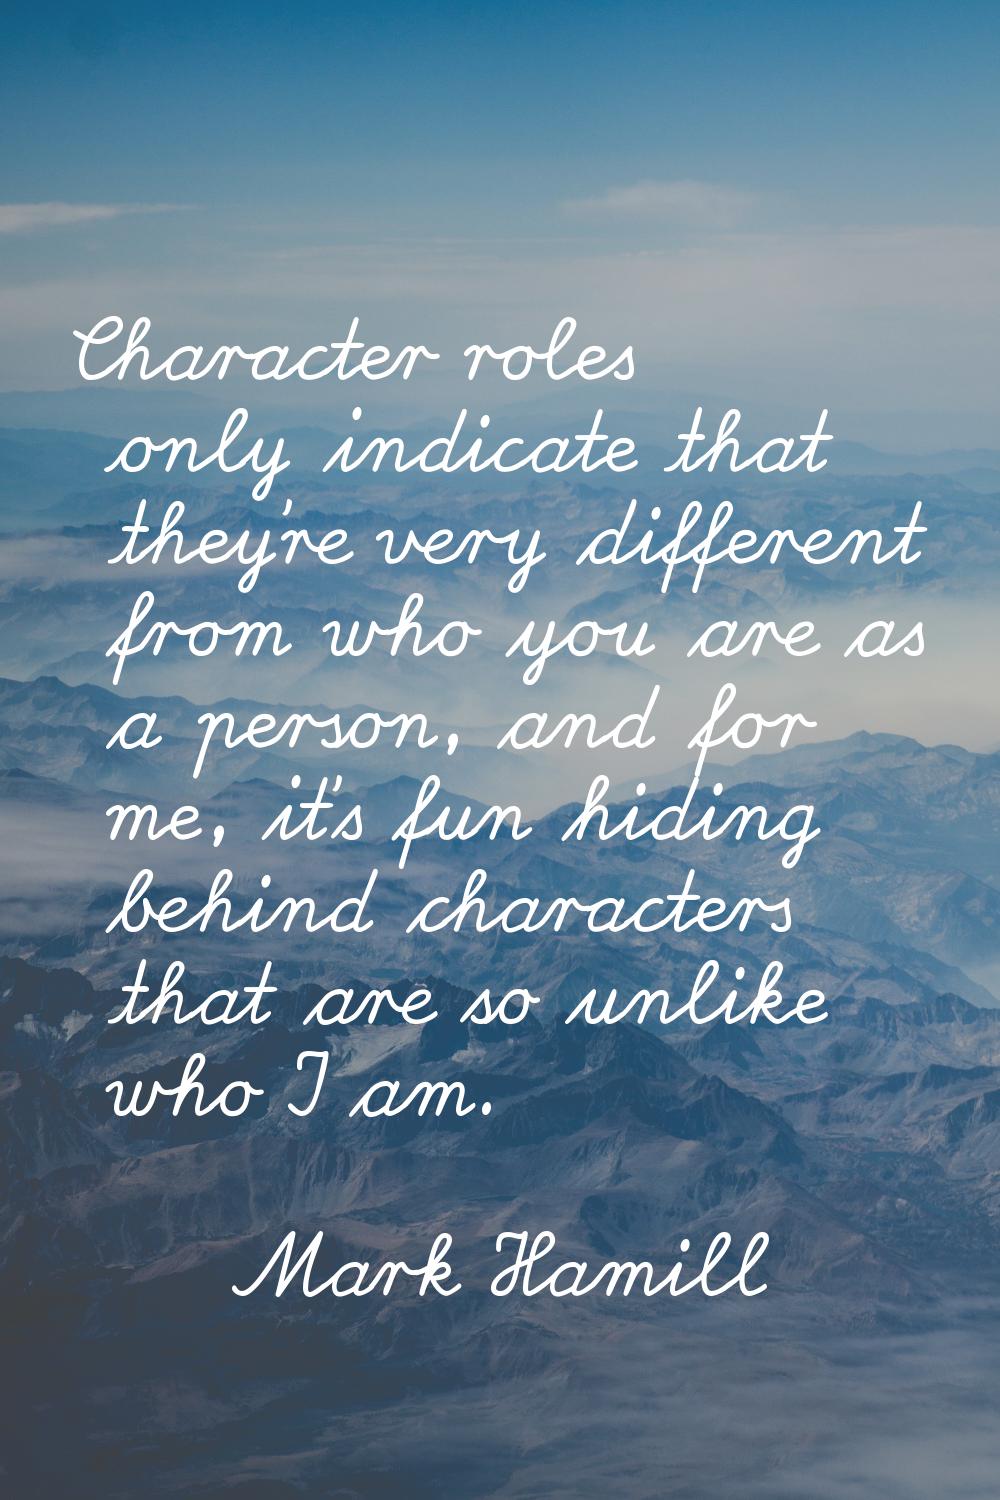 Character roles only indicate that they're very different from who you are as a person, and for me,